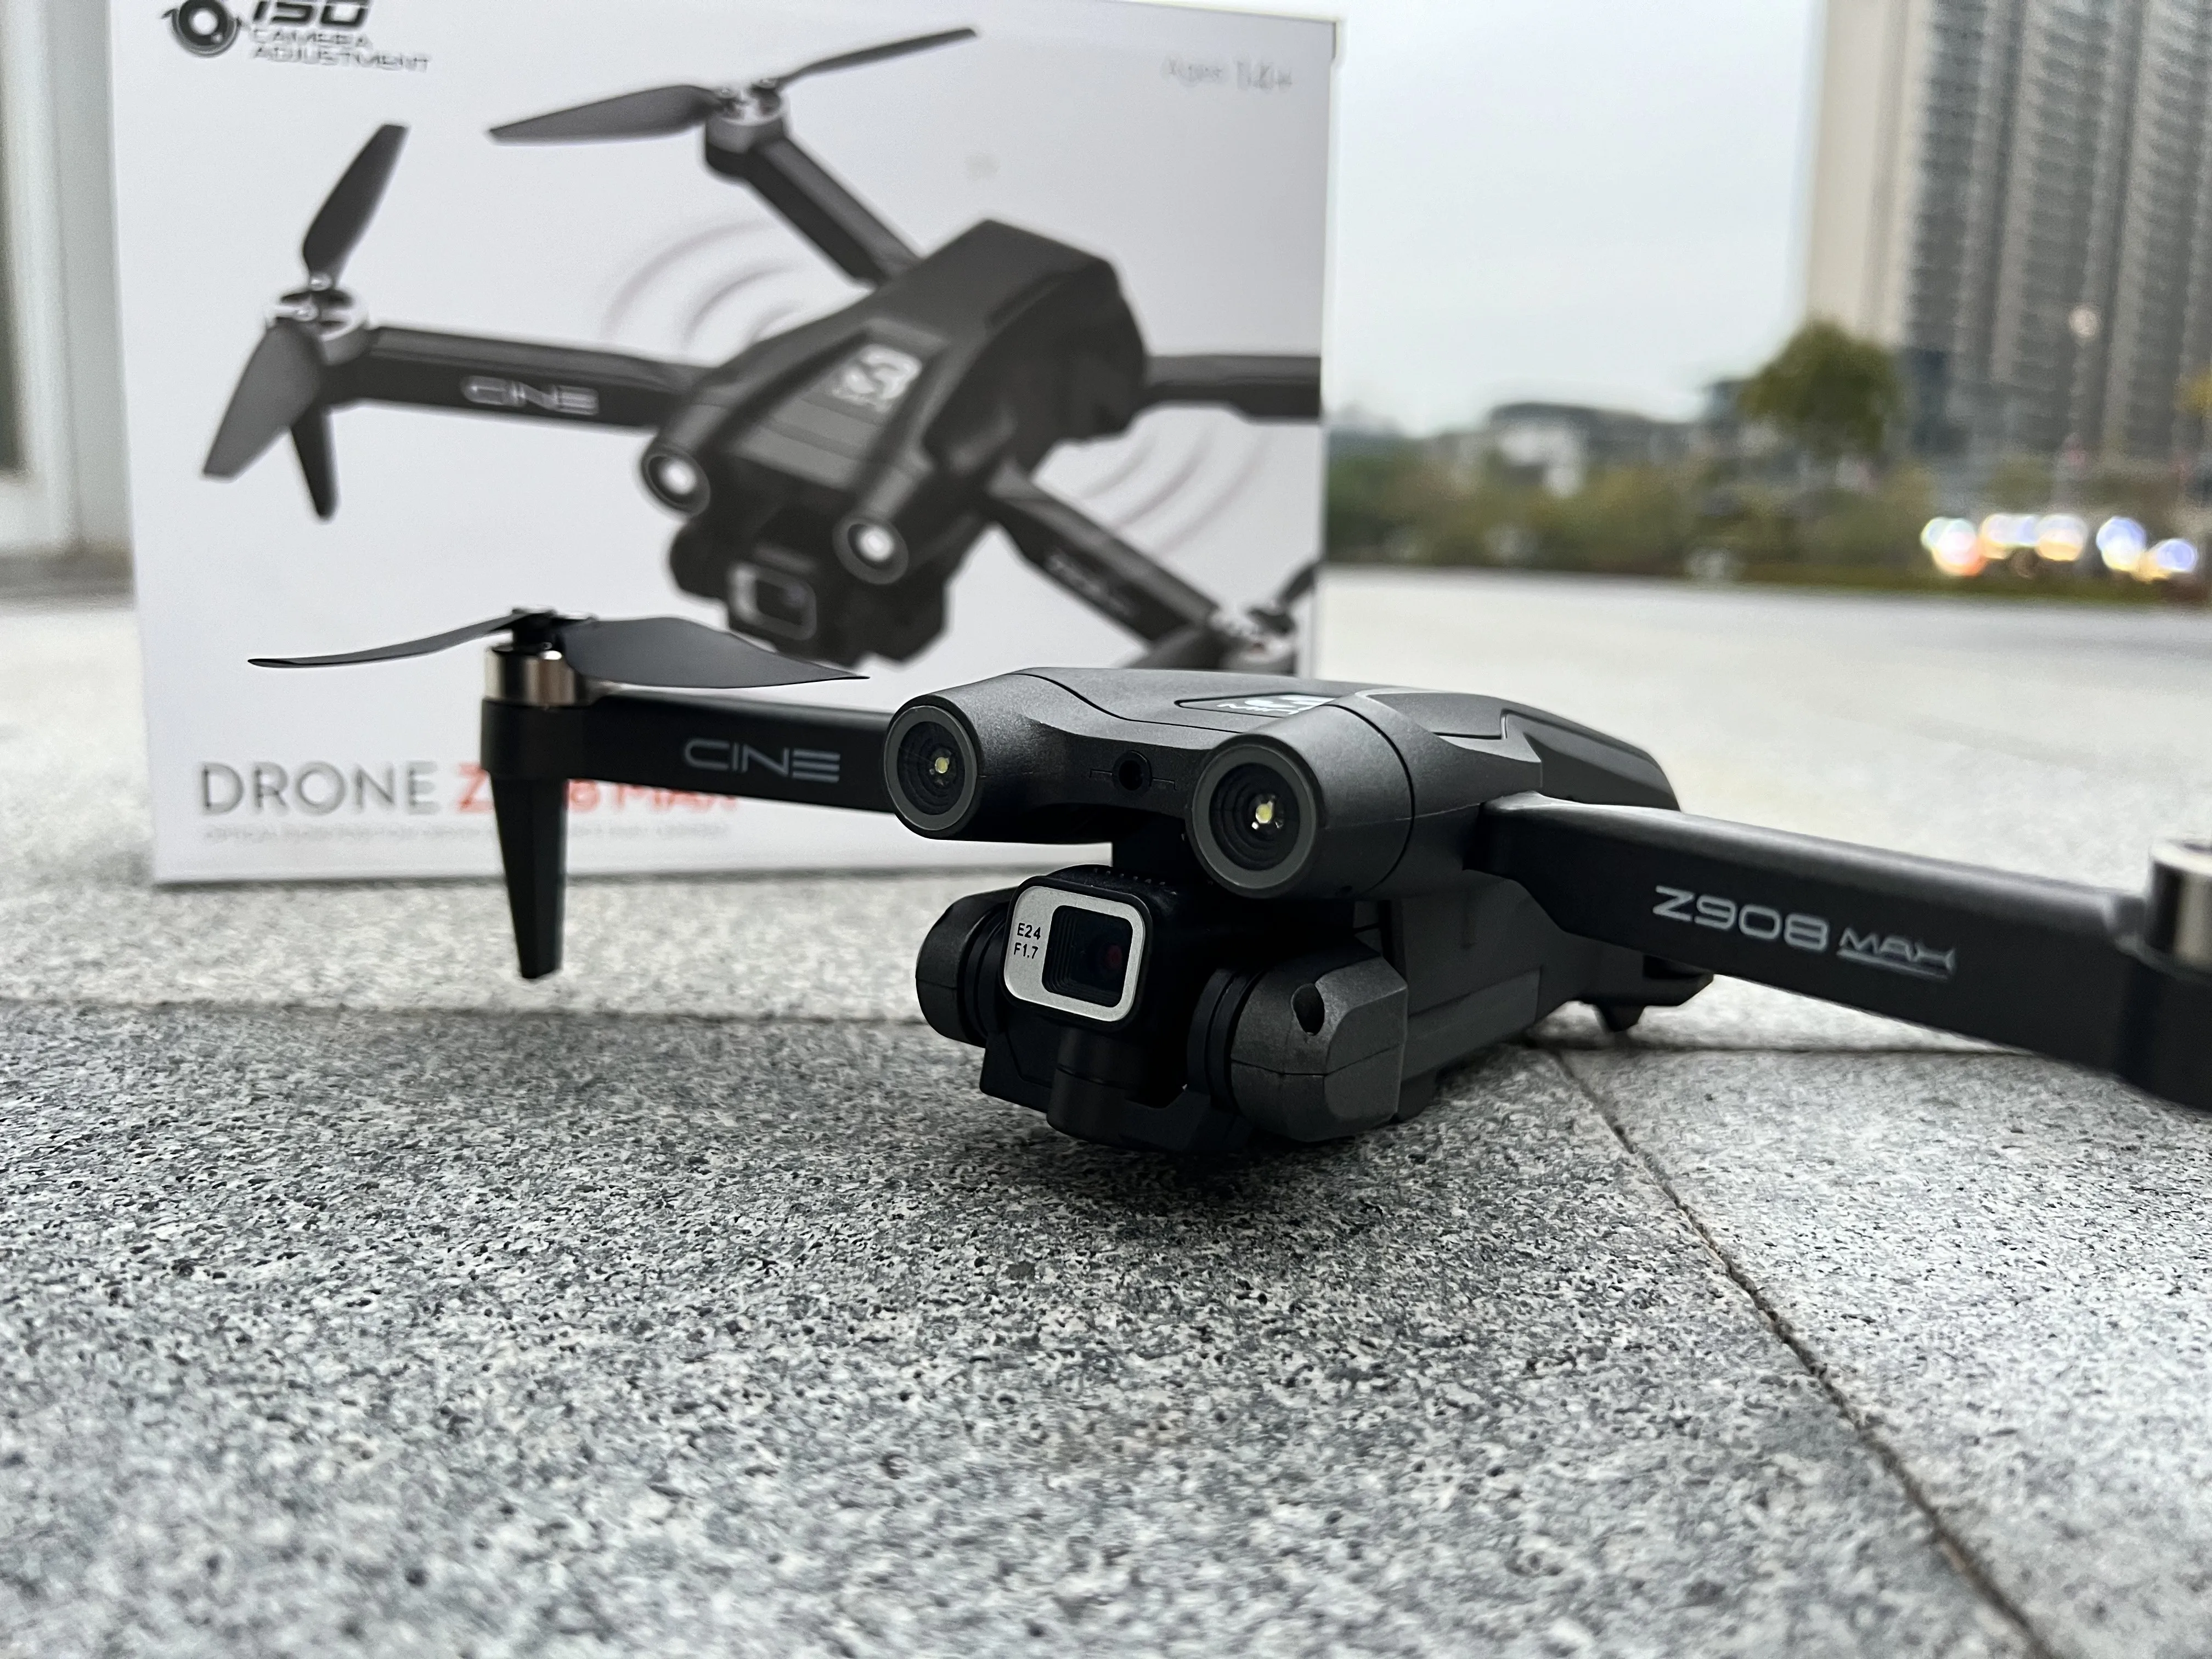 New Z908Max Dual8K GPS 9KM Professional Drone WIFI FPV Obstacle Avoidance Brushless Four-Axis Folding Rc Quadcopter Toy Gift photo review